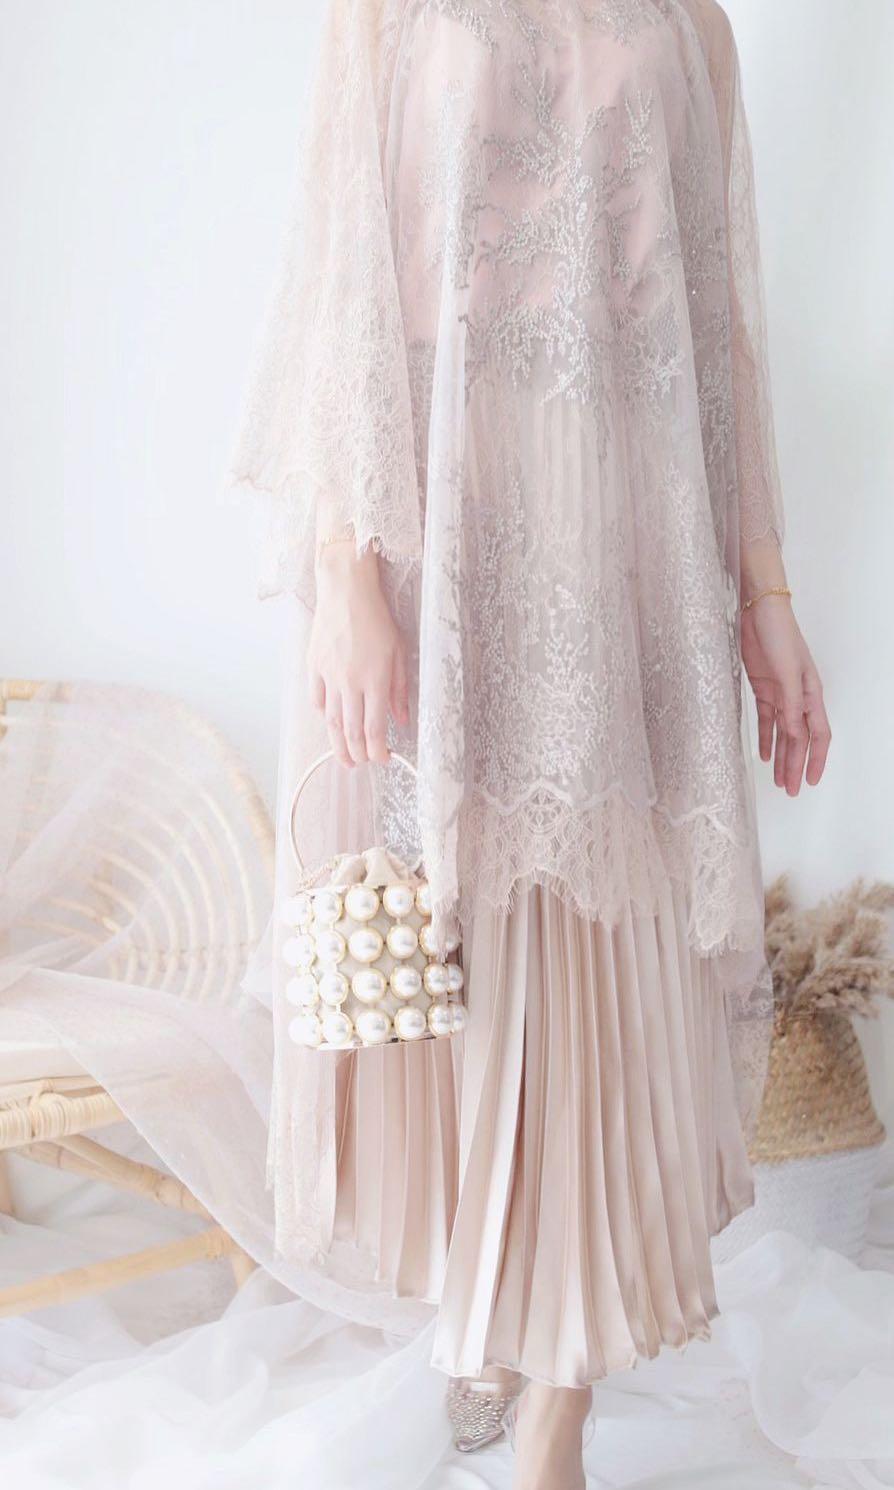 (JUAL) Luxe Lace Avalie Dress kurung with Pleated Skirt